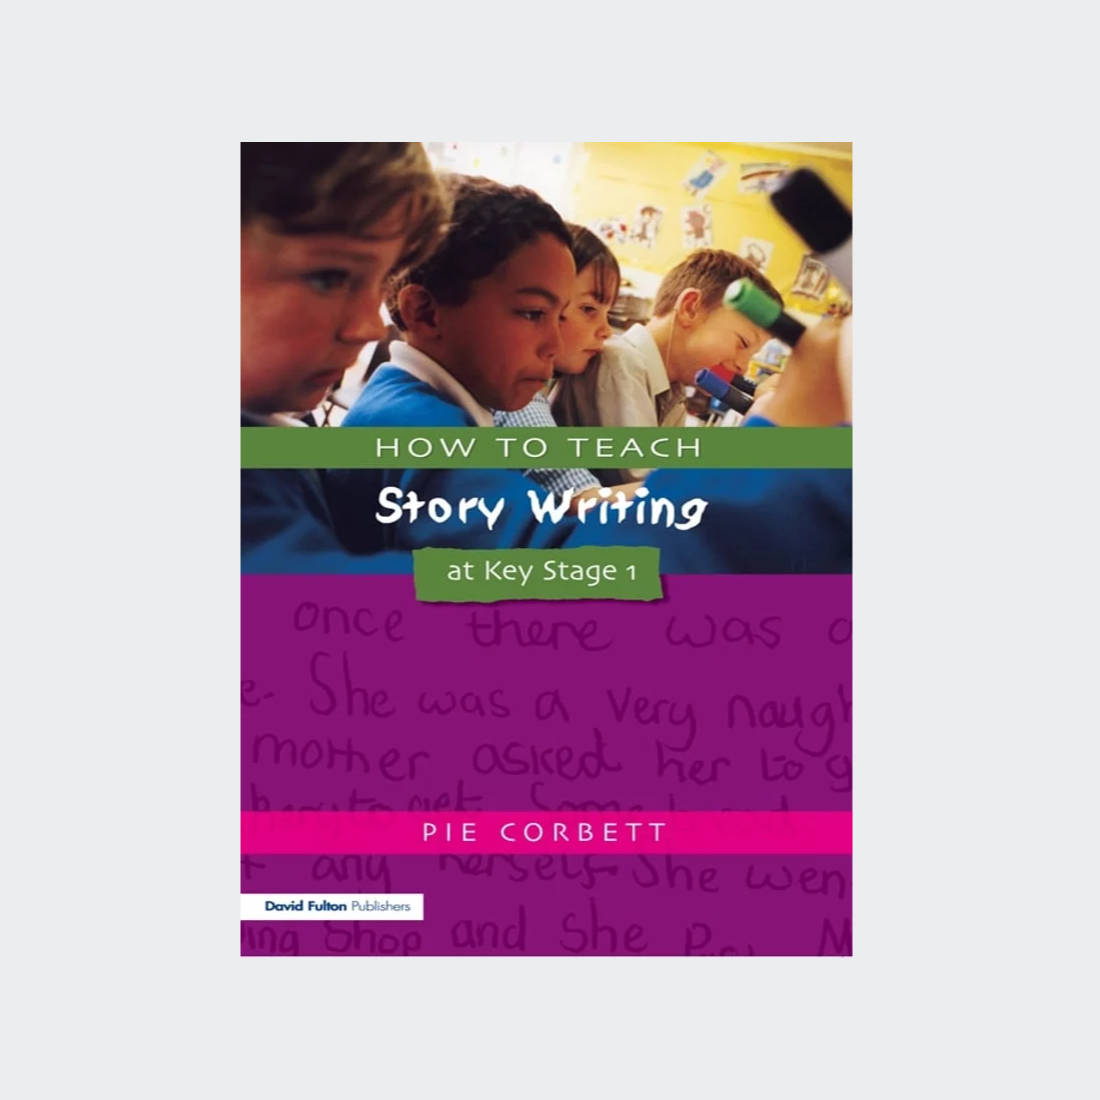 how-to-teach-story-writing-at-key-stage-1-book-talk-for-writing